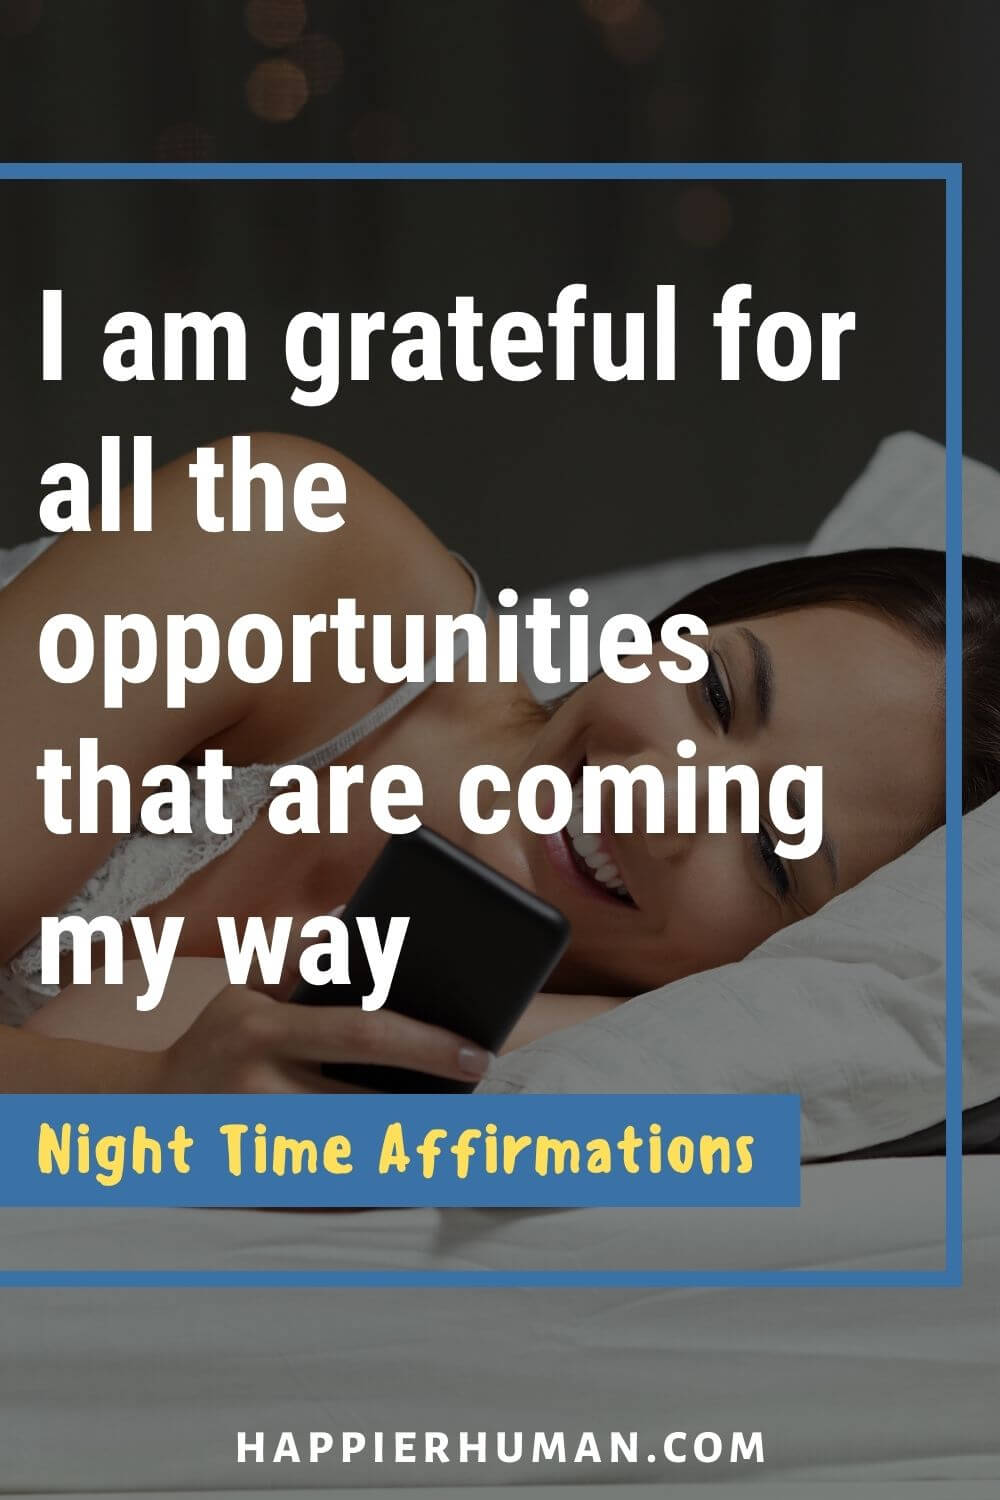 Night Time Affirmations - I am grateful for all the opportunities that are coming my way | night affirmations for success | night affirmations for self love | bedtime affirmations miracle morning